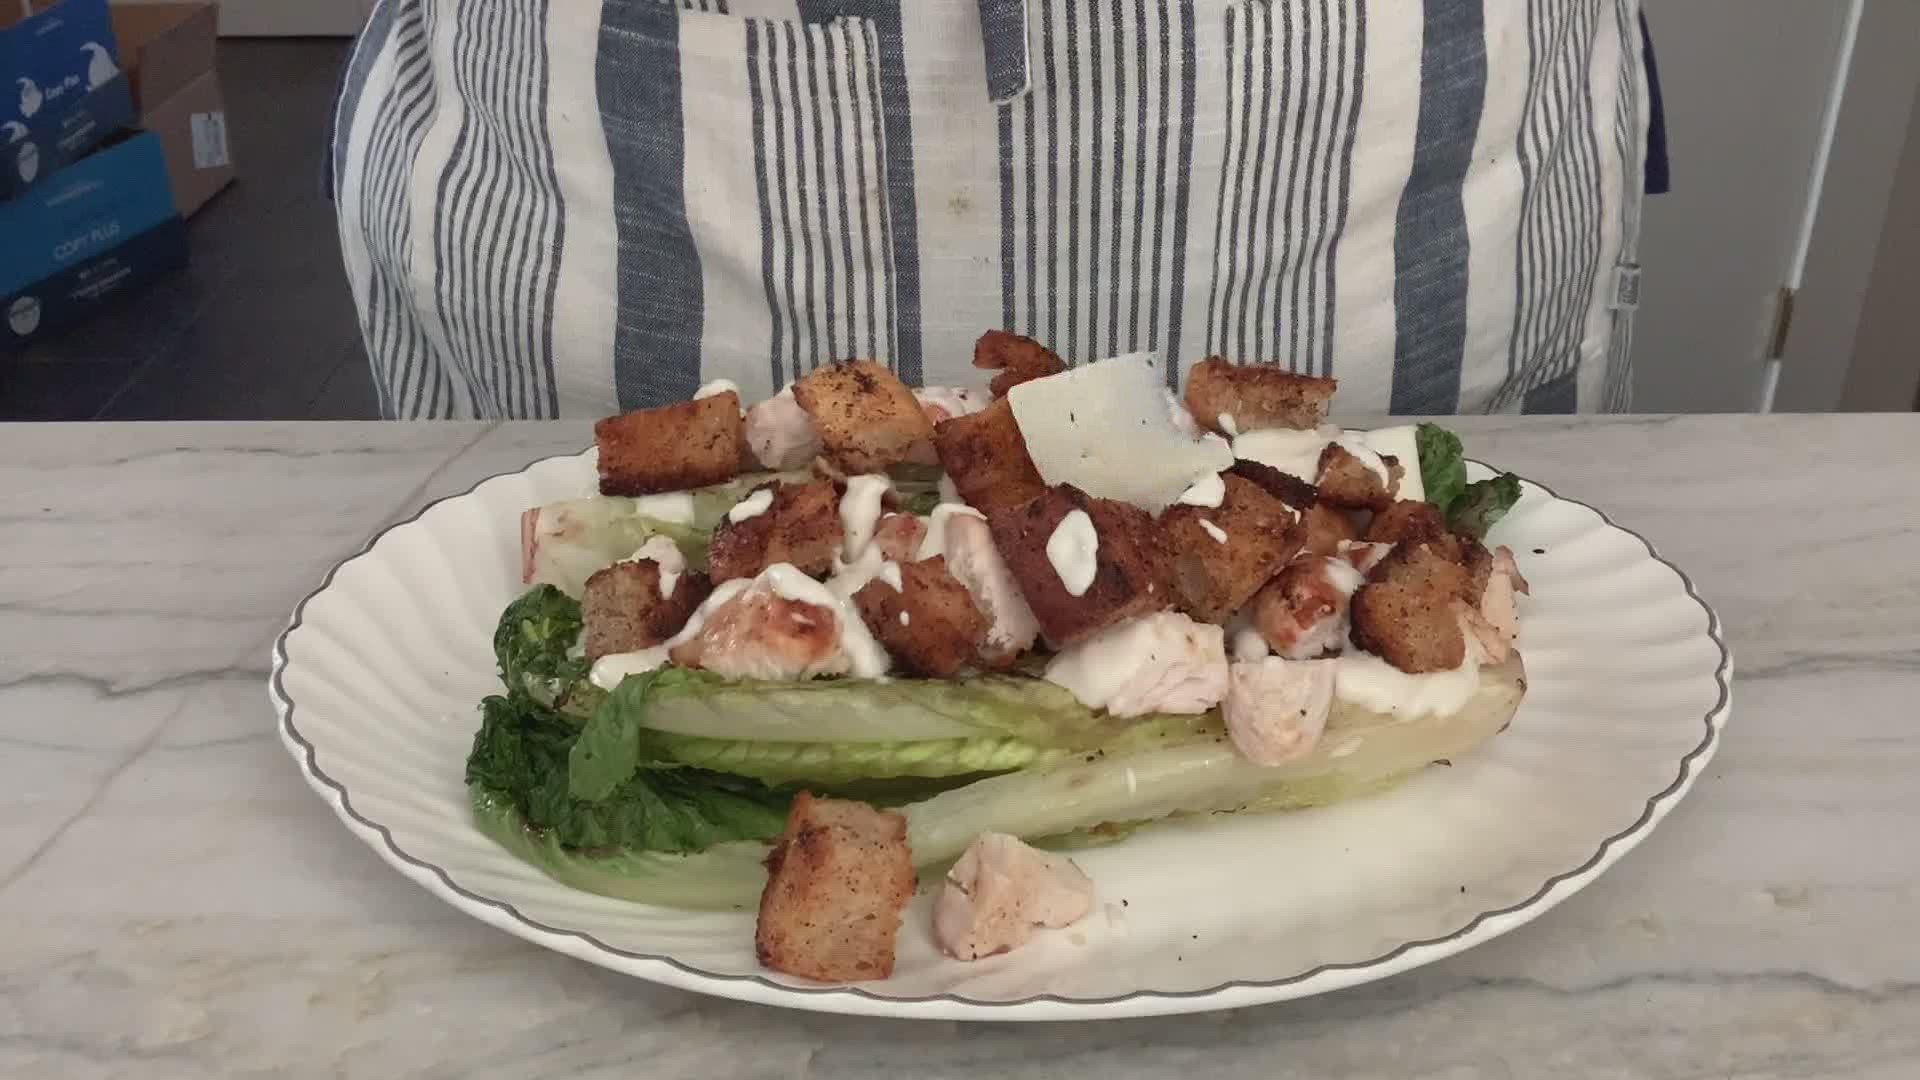 Watch her put together a Grilled Chicken Caesar Salad that will fill you up and leave you satisfied.